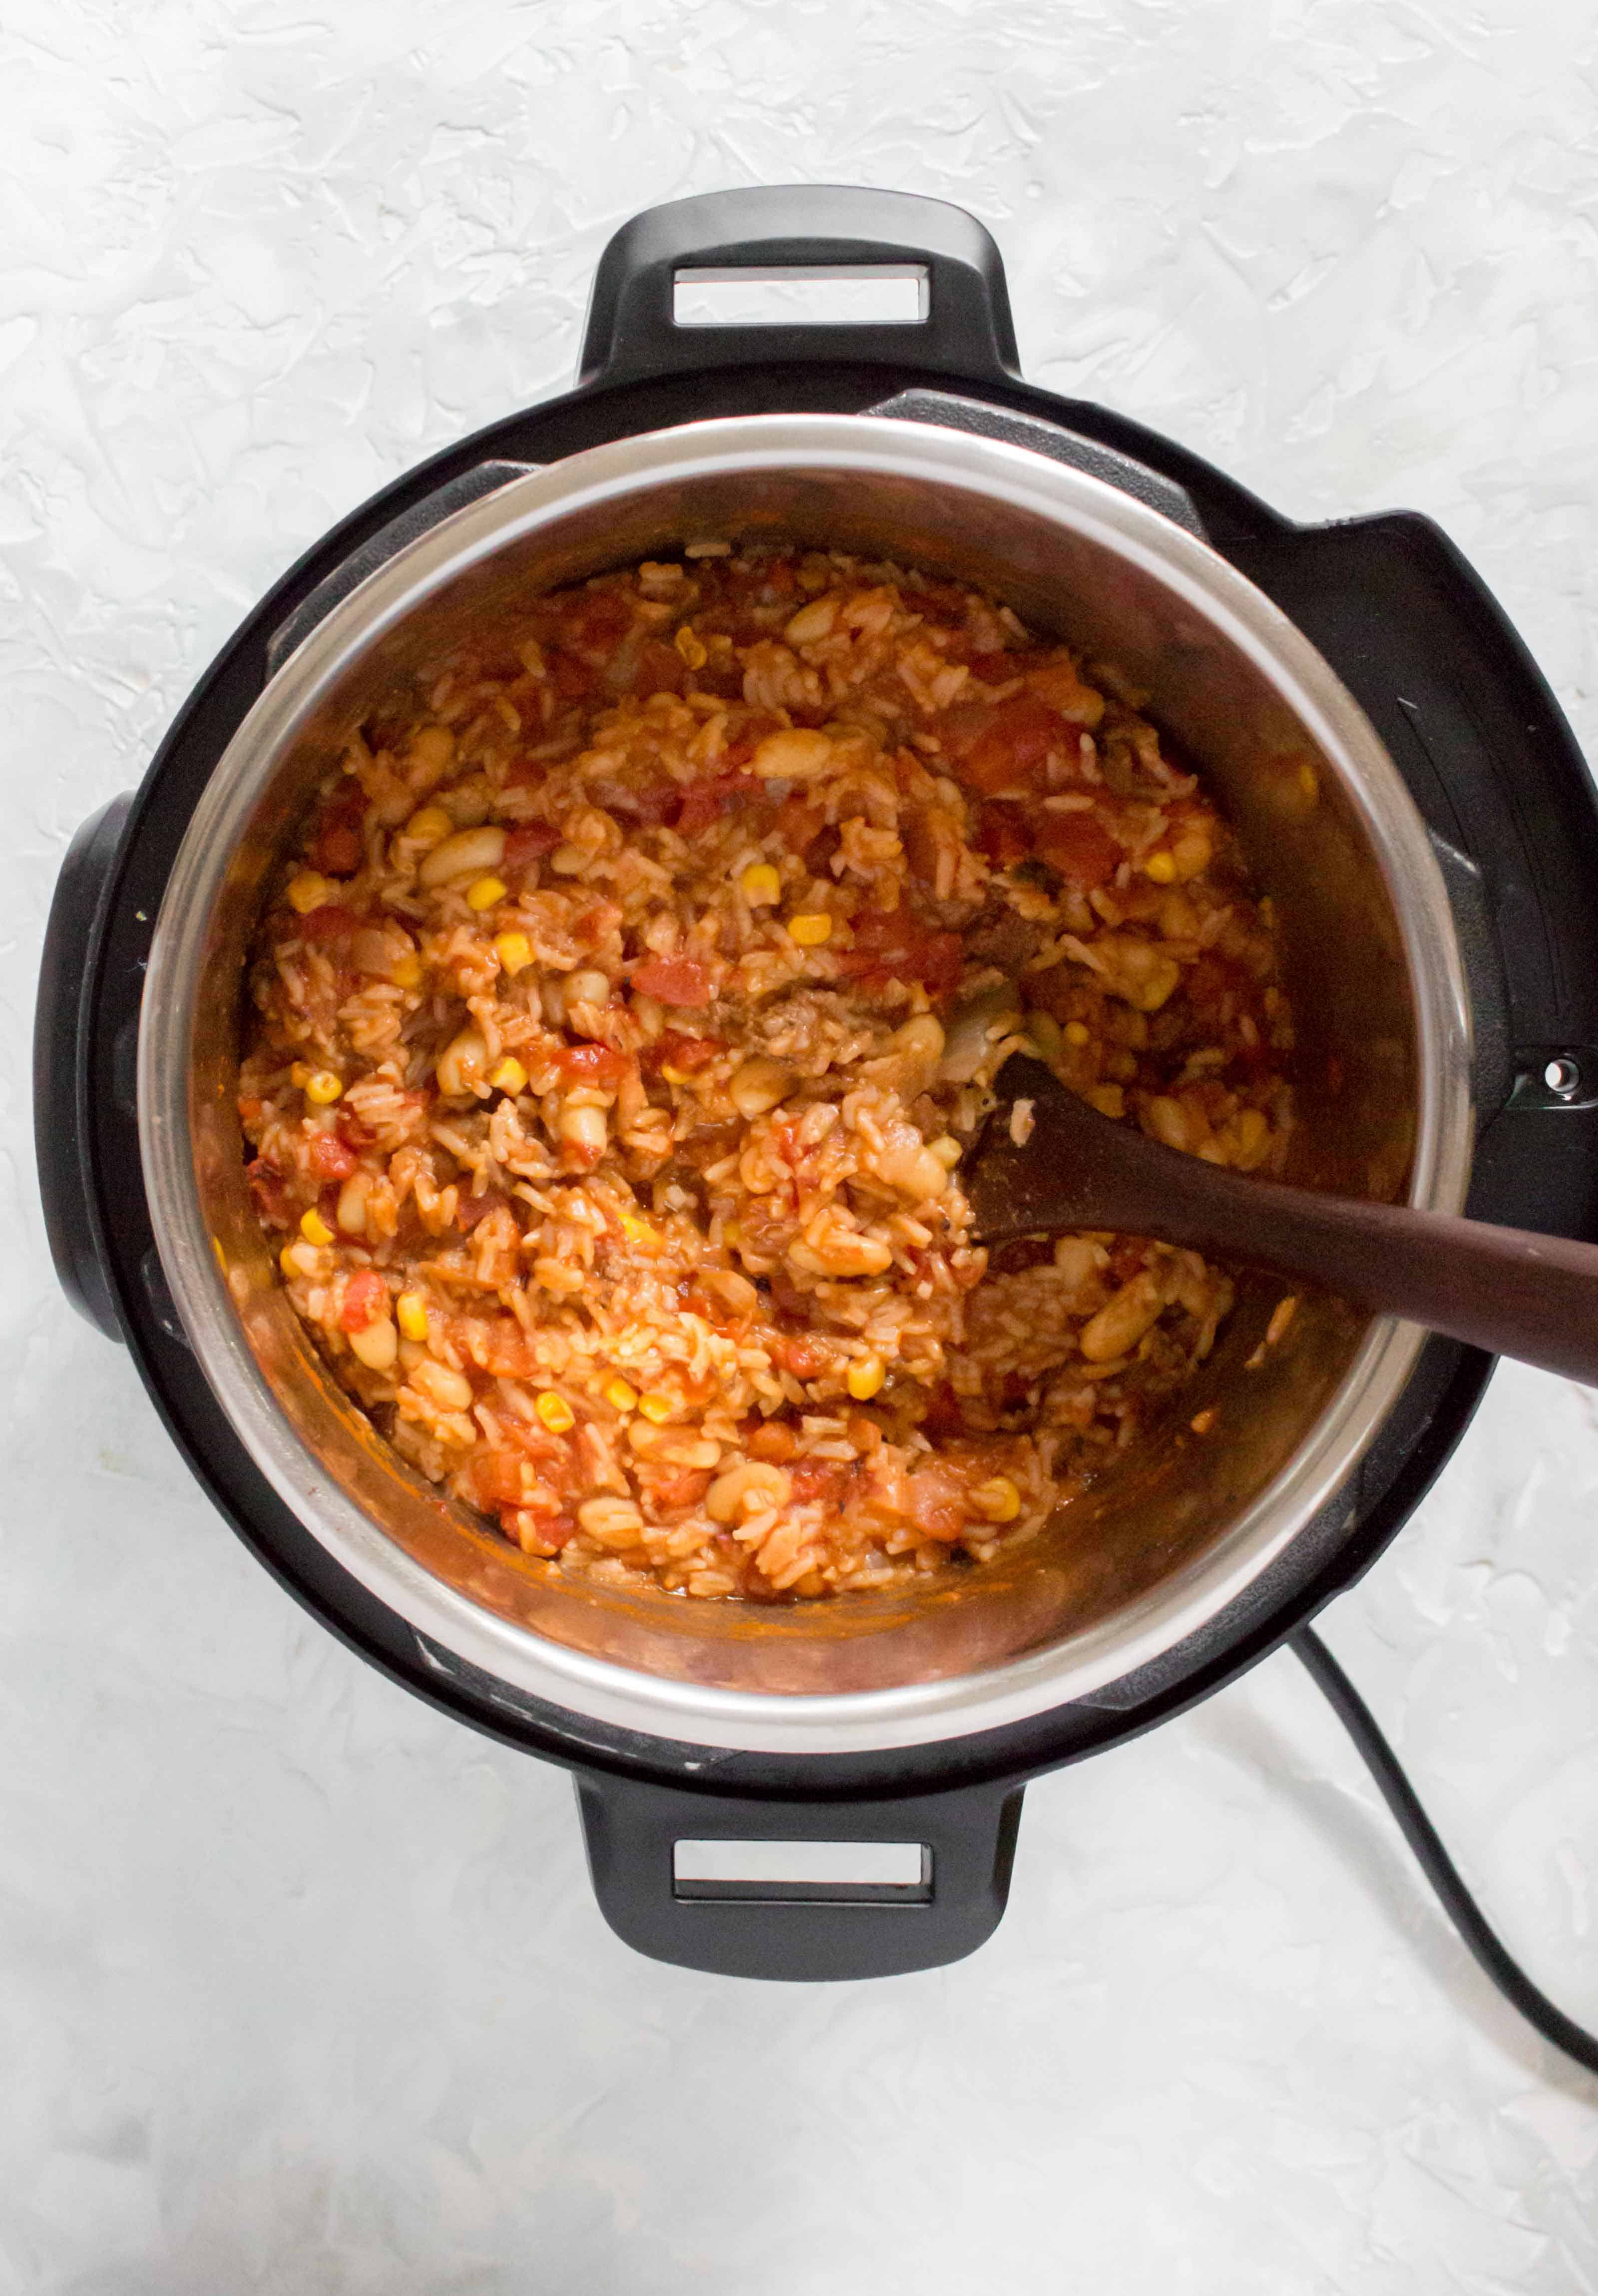 This Instant Pot Spicy Beef and Rice is the perfect meal prep for the week or as a last minute weeknight dinner!